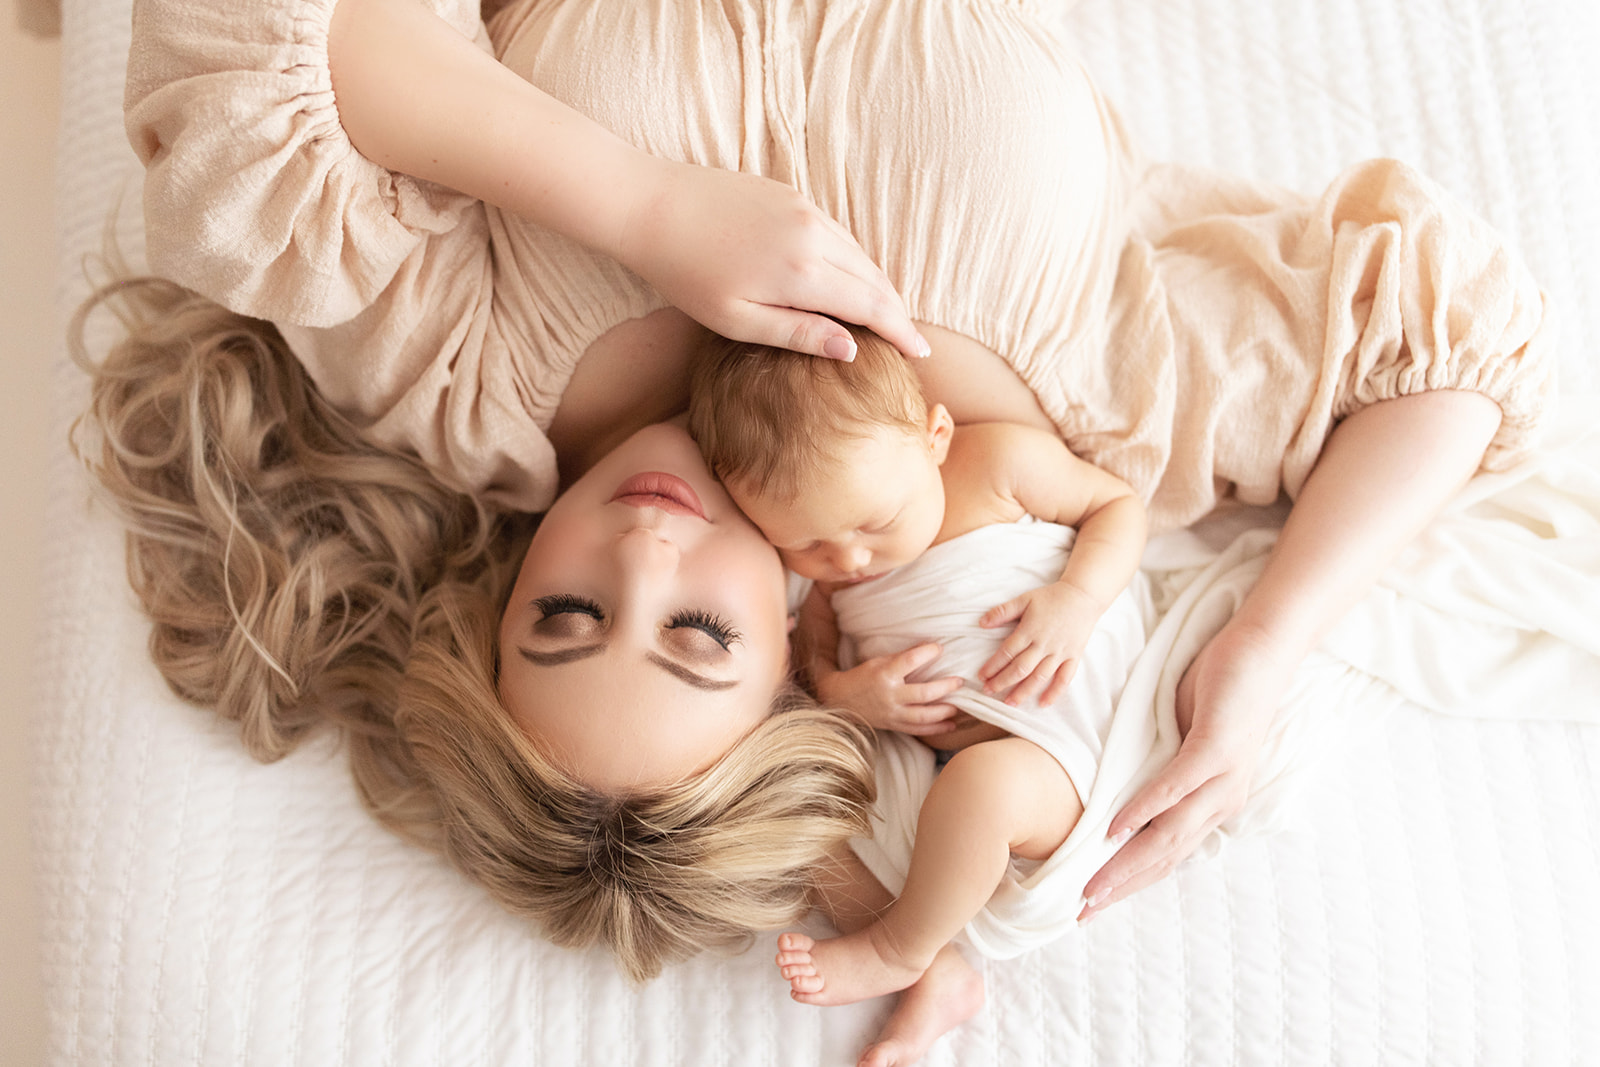 Mom wearing a beige dress cuddles with her newborn on a bed golden lotus doula services